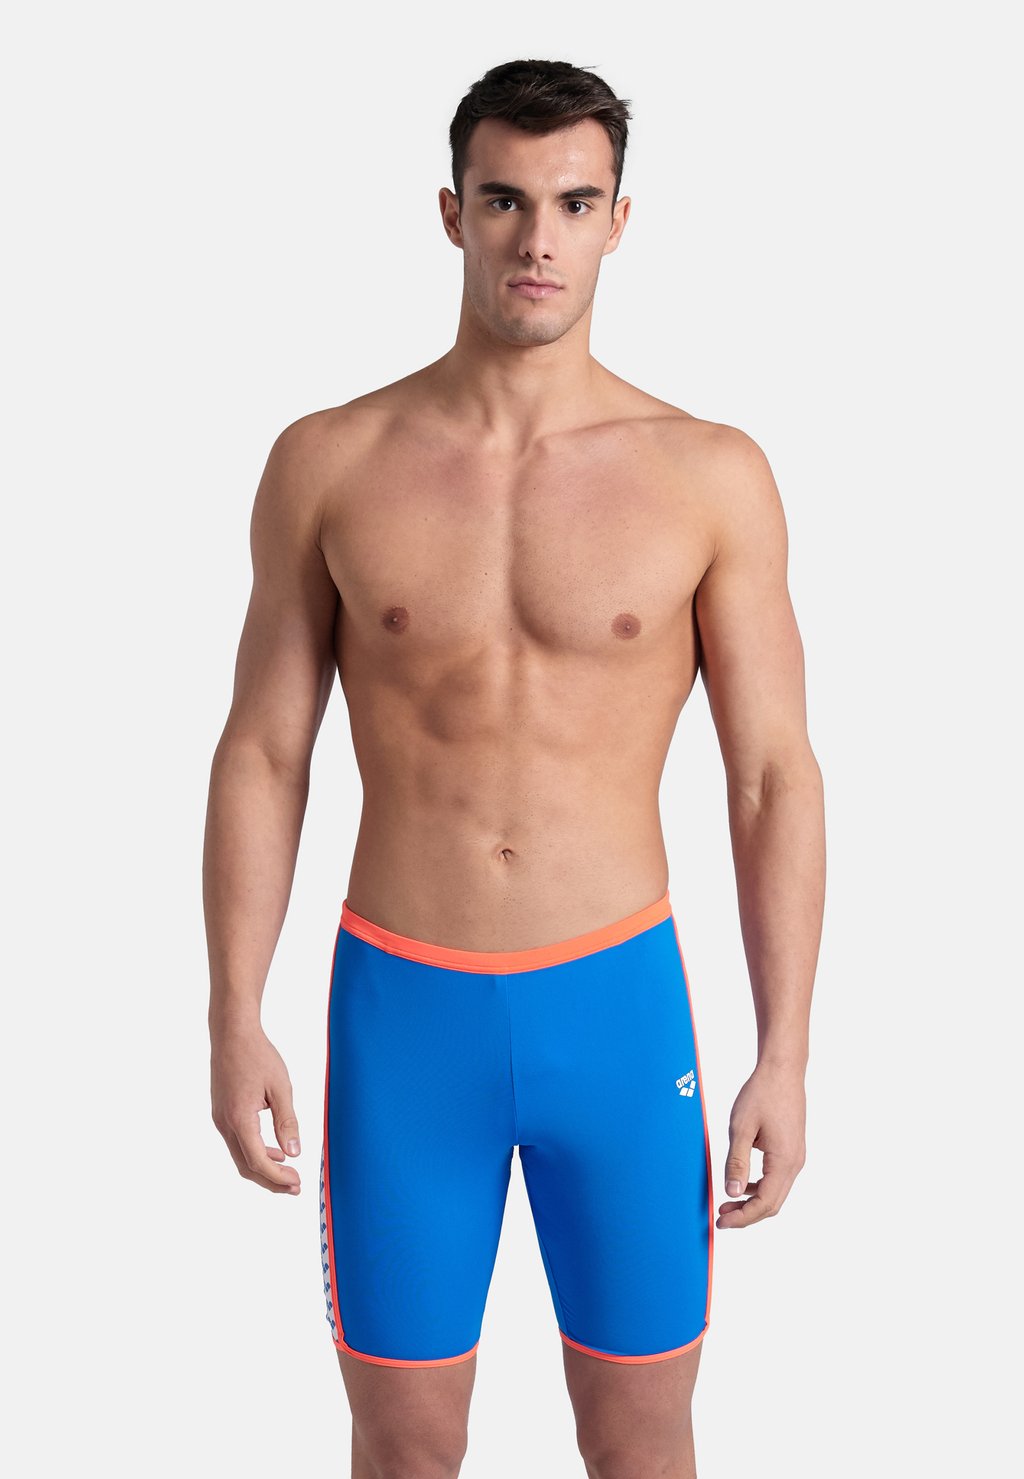 Шорты Icons Solid Jammer Arena, цвет blue river bright coral